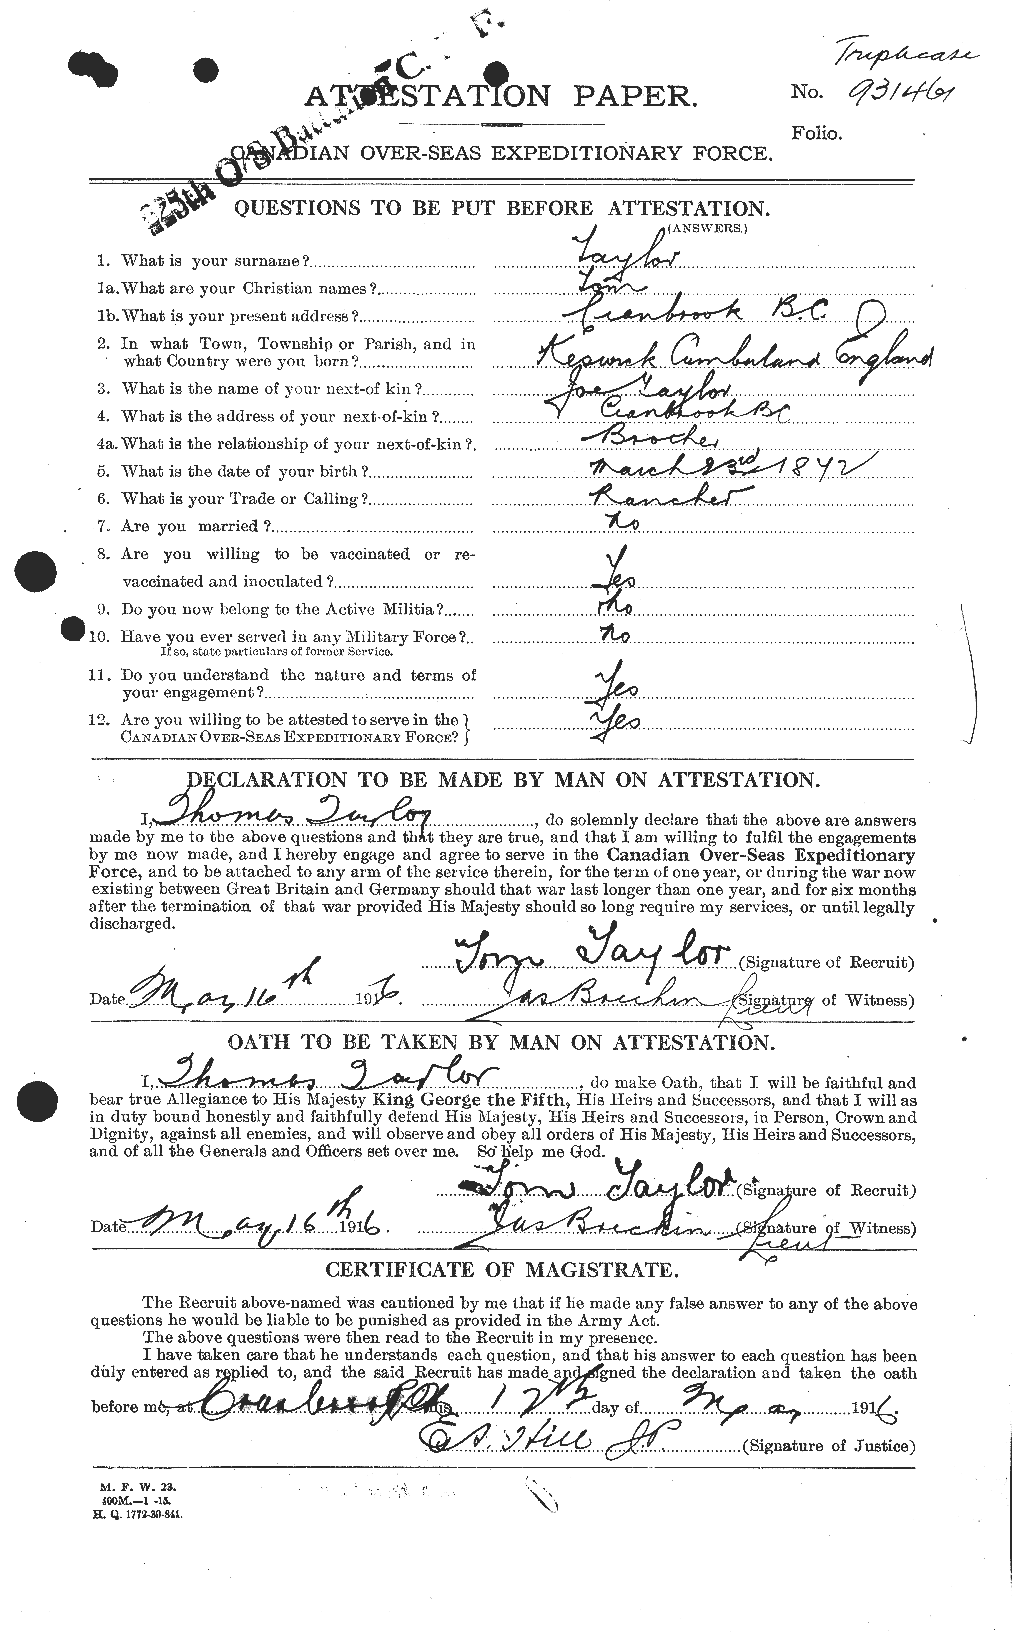 Personnel Records of the First World War - CEF 628019a